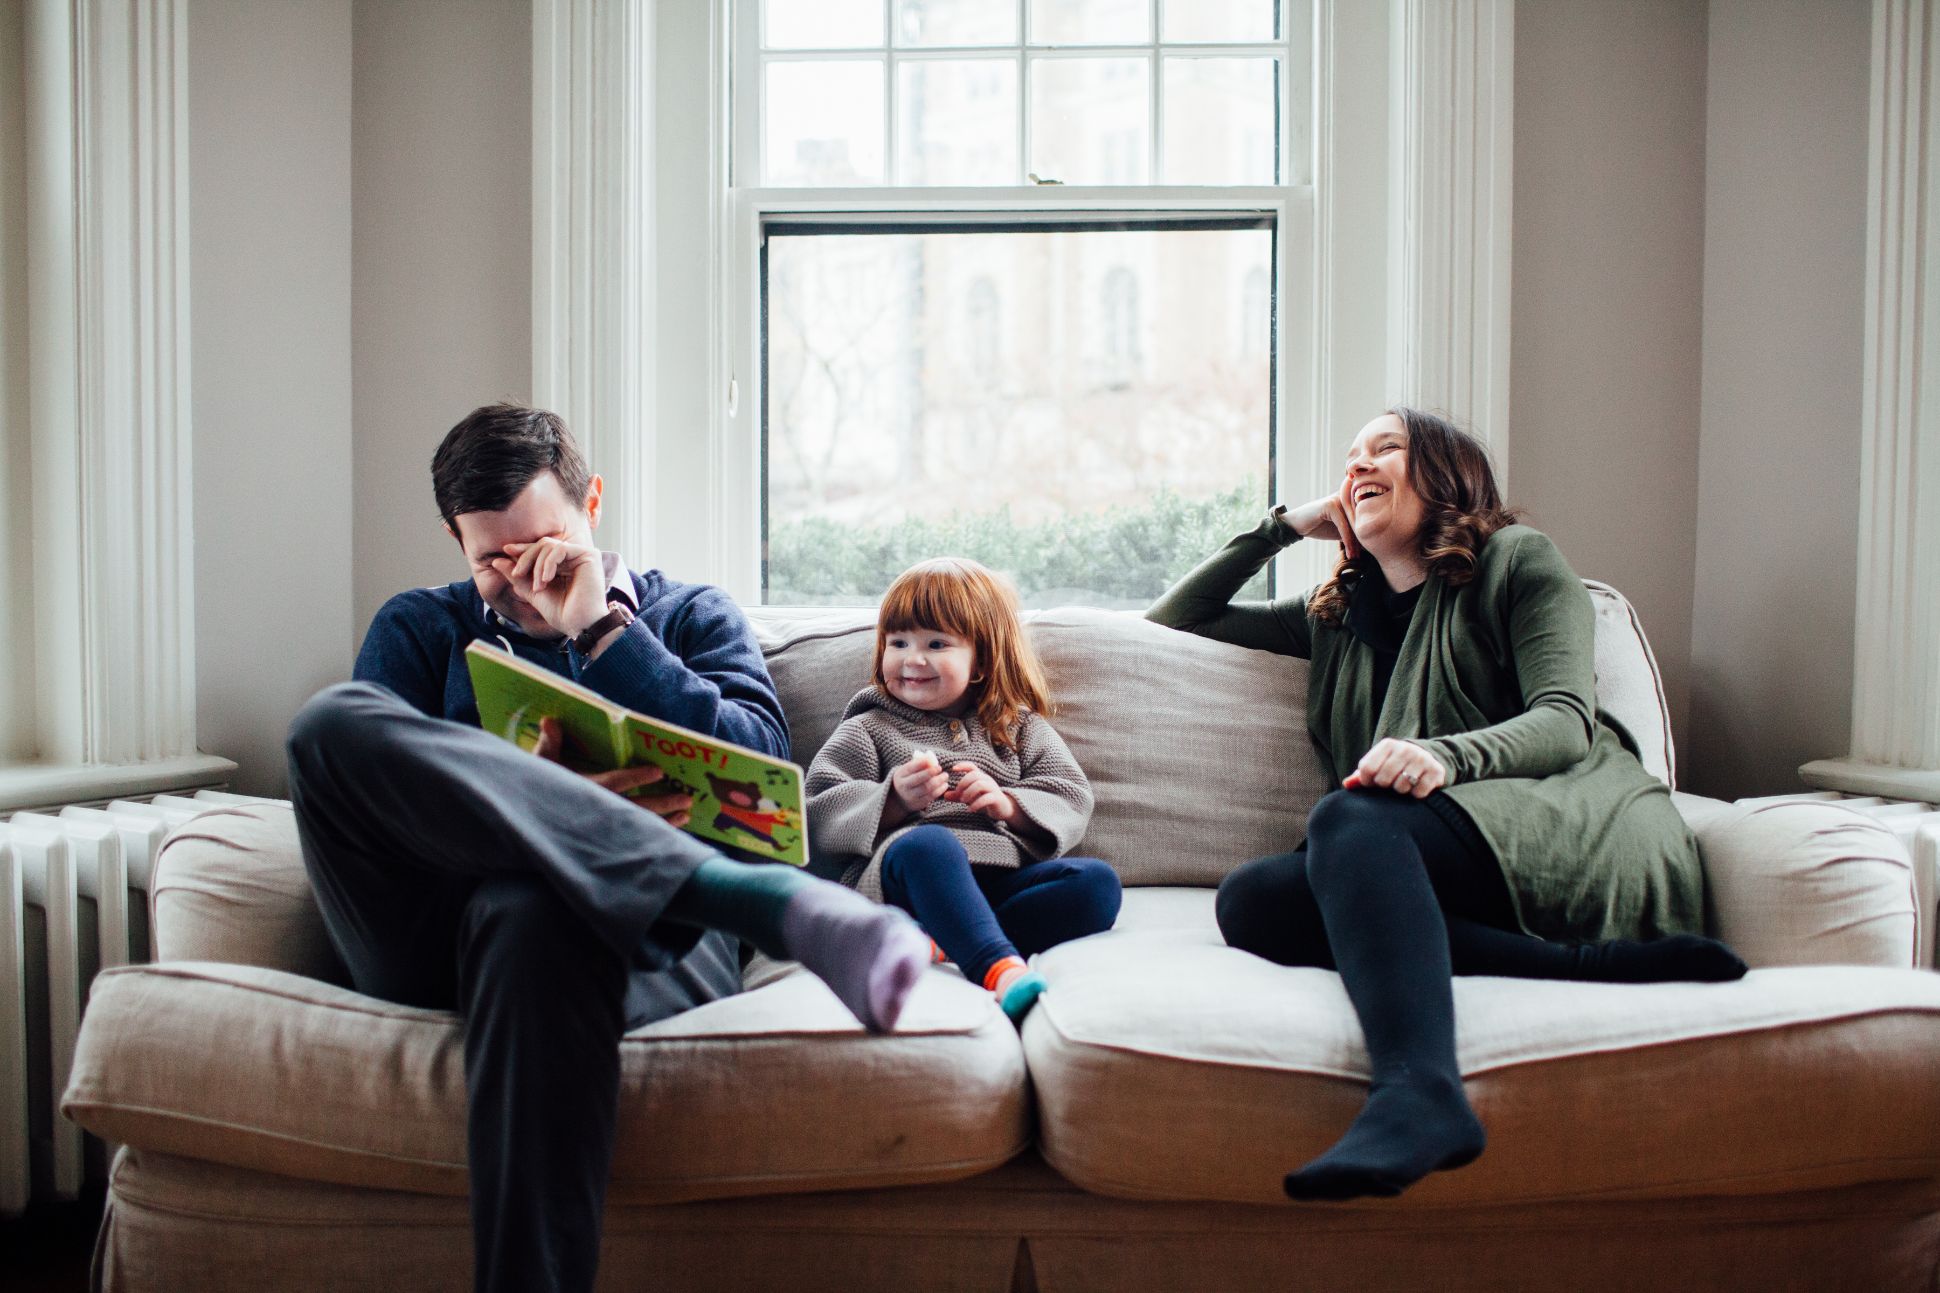 Family sitting on couch reading book together.